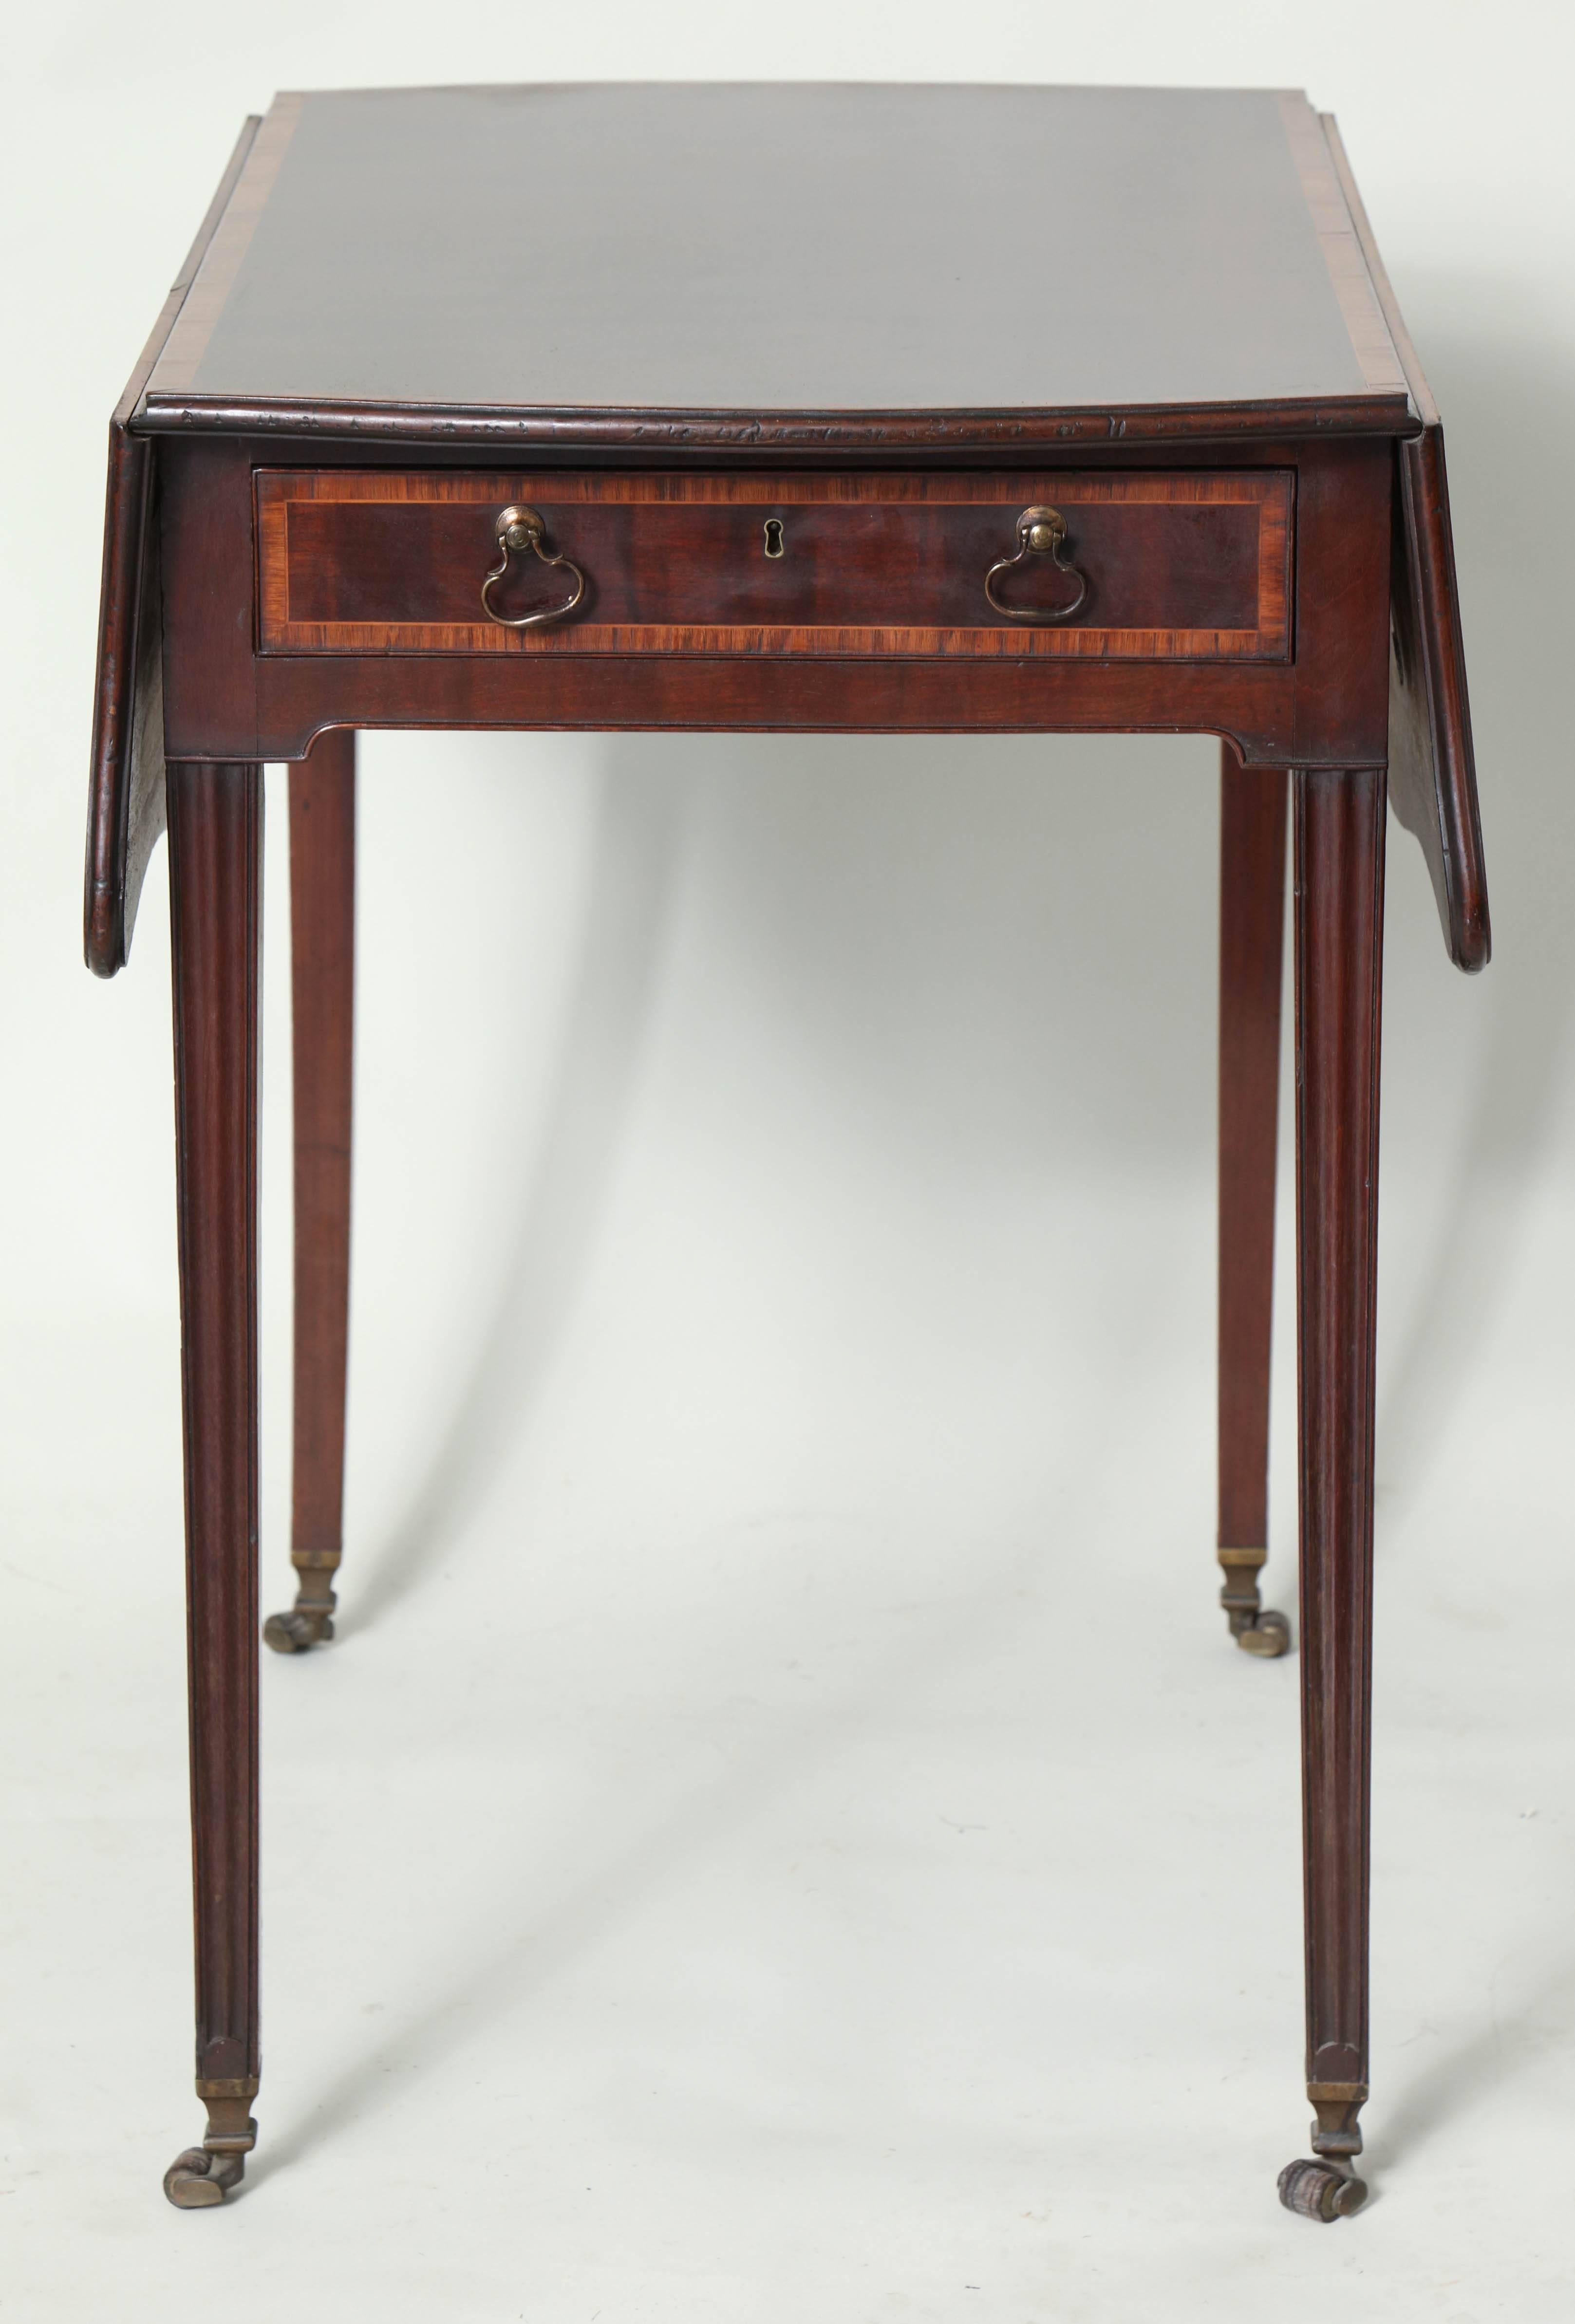 Very fine George III plum pudding mahogany pembroke table with tulipwood banded top, having beaded edge, the shaped leaves over tulipwood banded drawer with original brass pulls on taped legs with cupid bow fluting, the feet with original shaped box